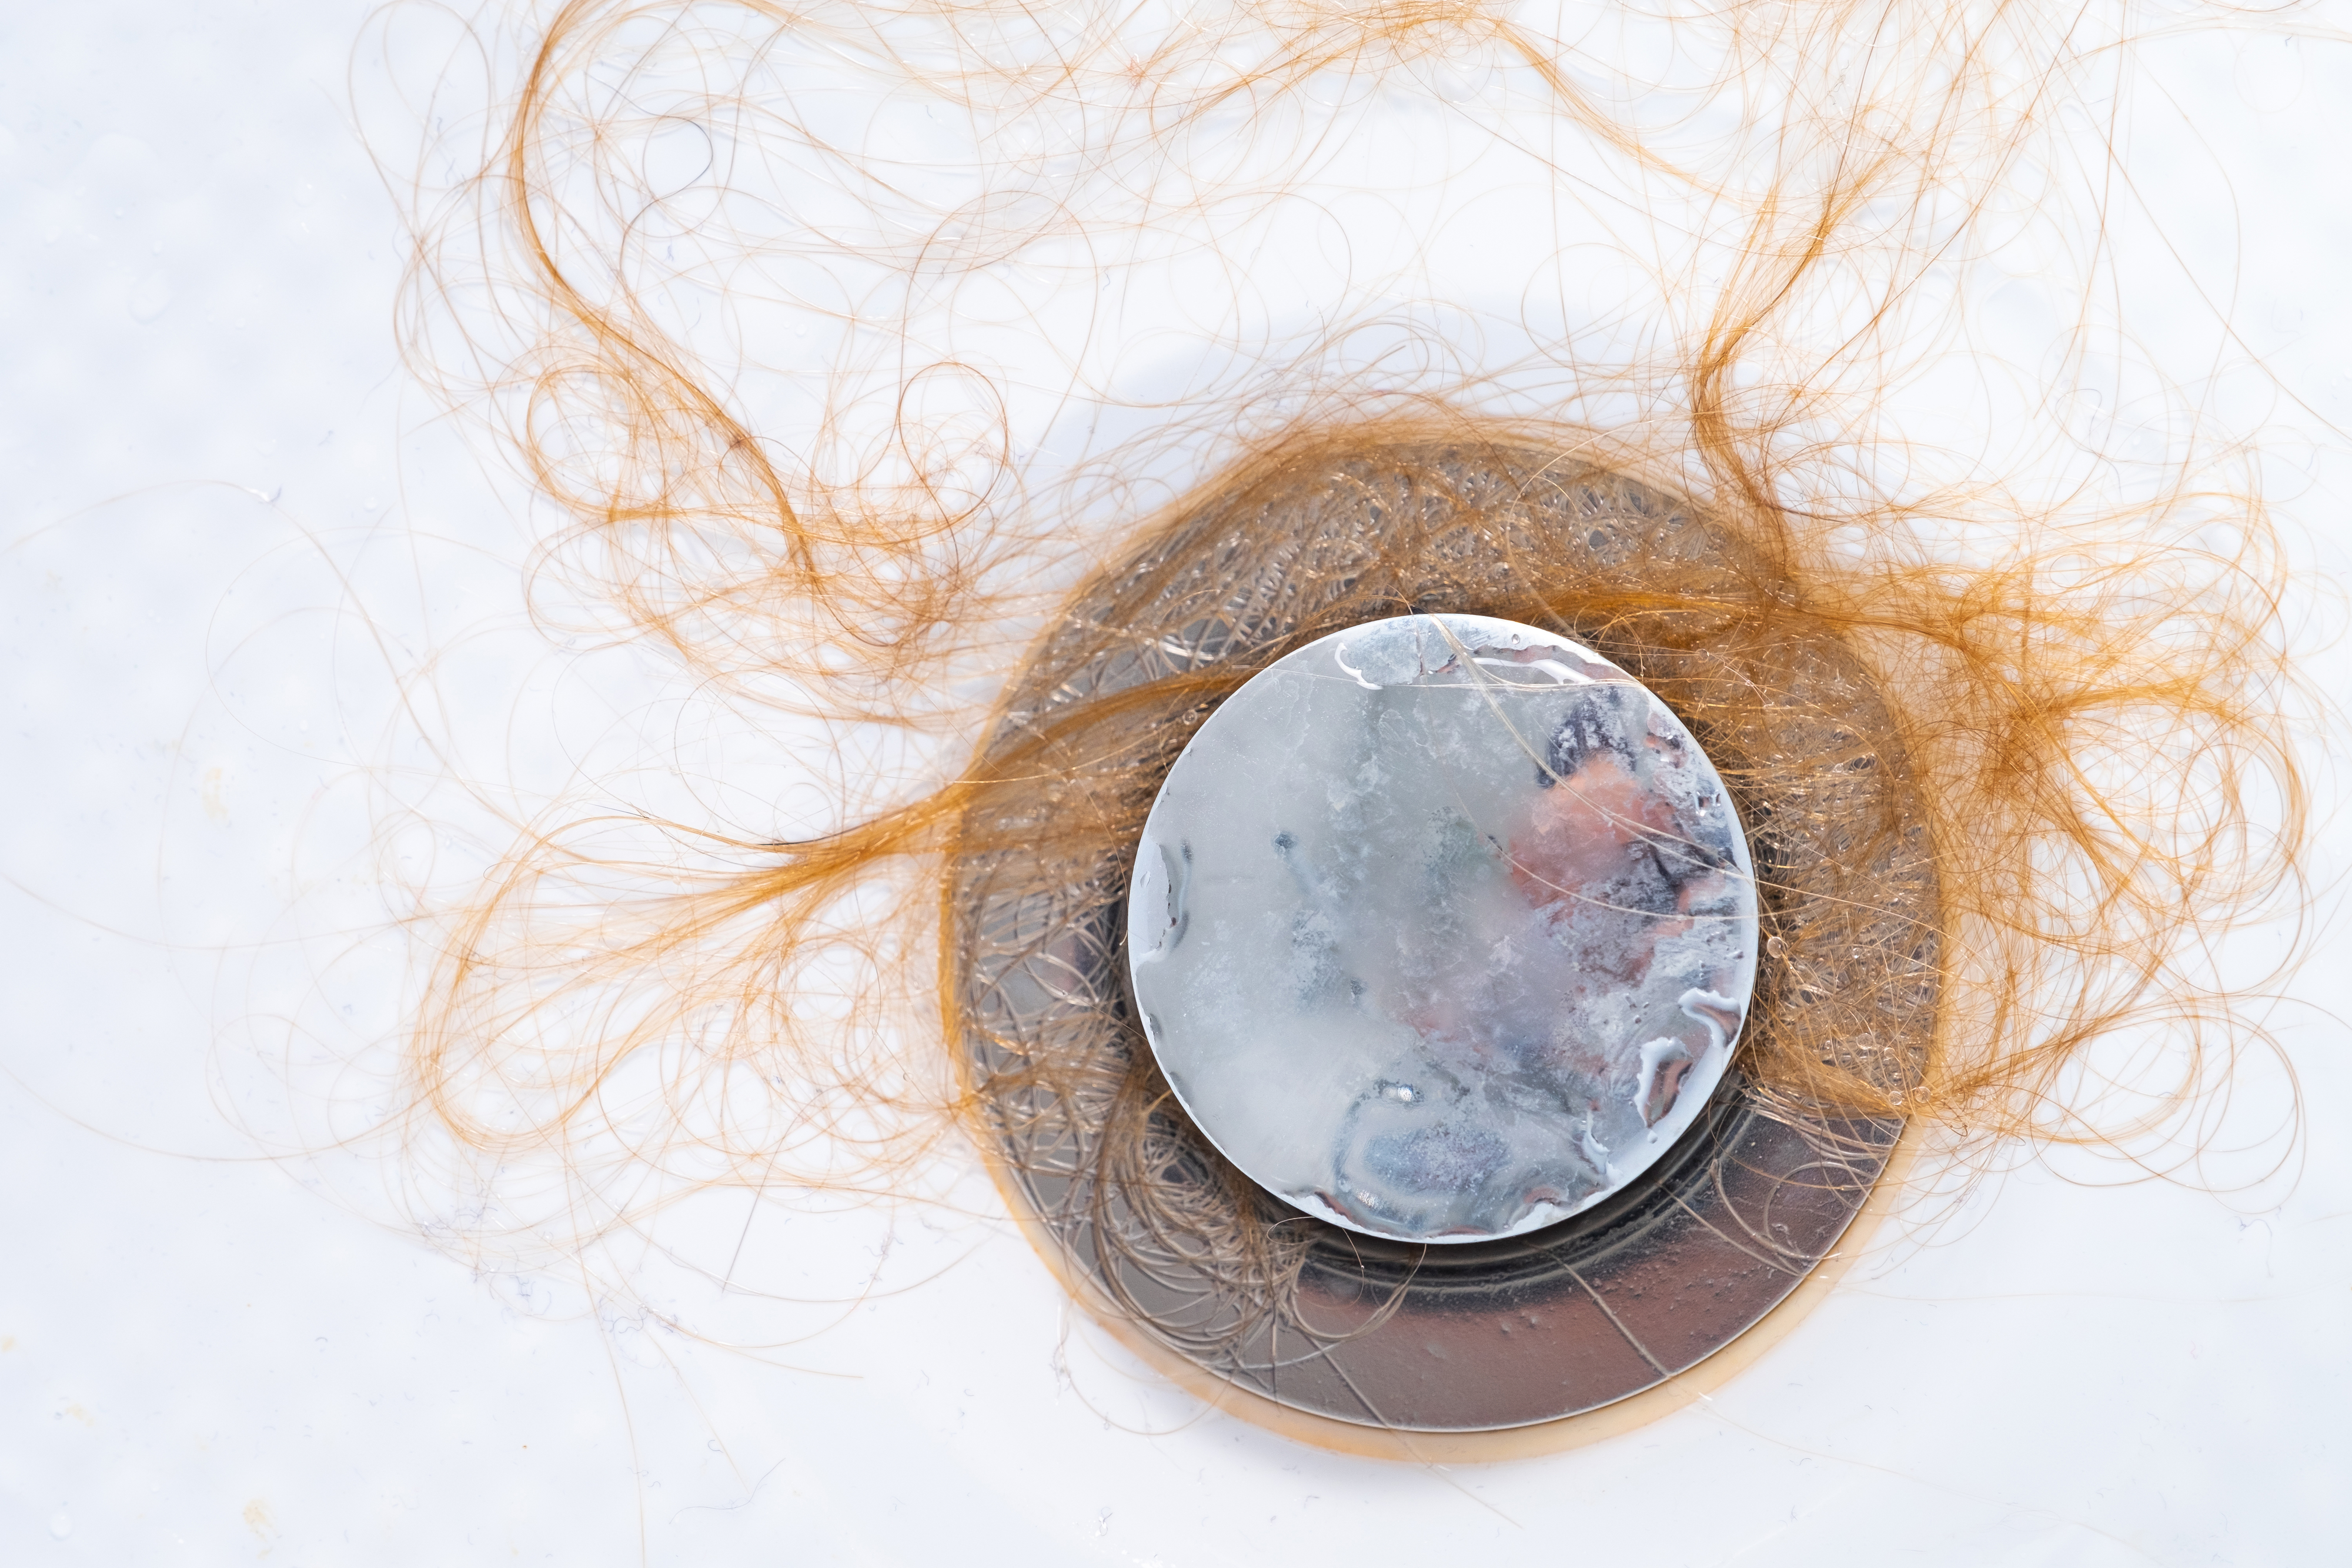 A frozen condom surrounded by strands of hair, suggestive of sexual themes related to cold temperatures or problems